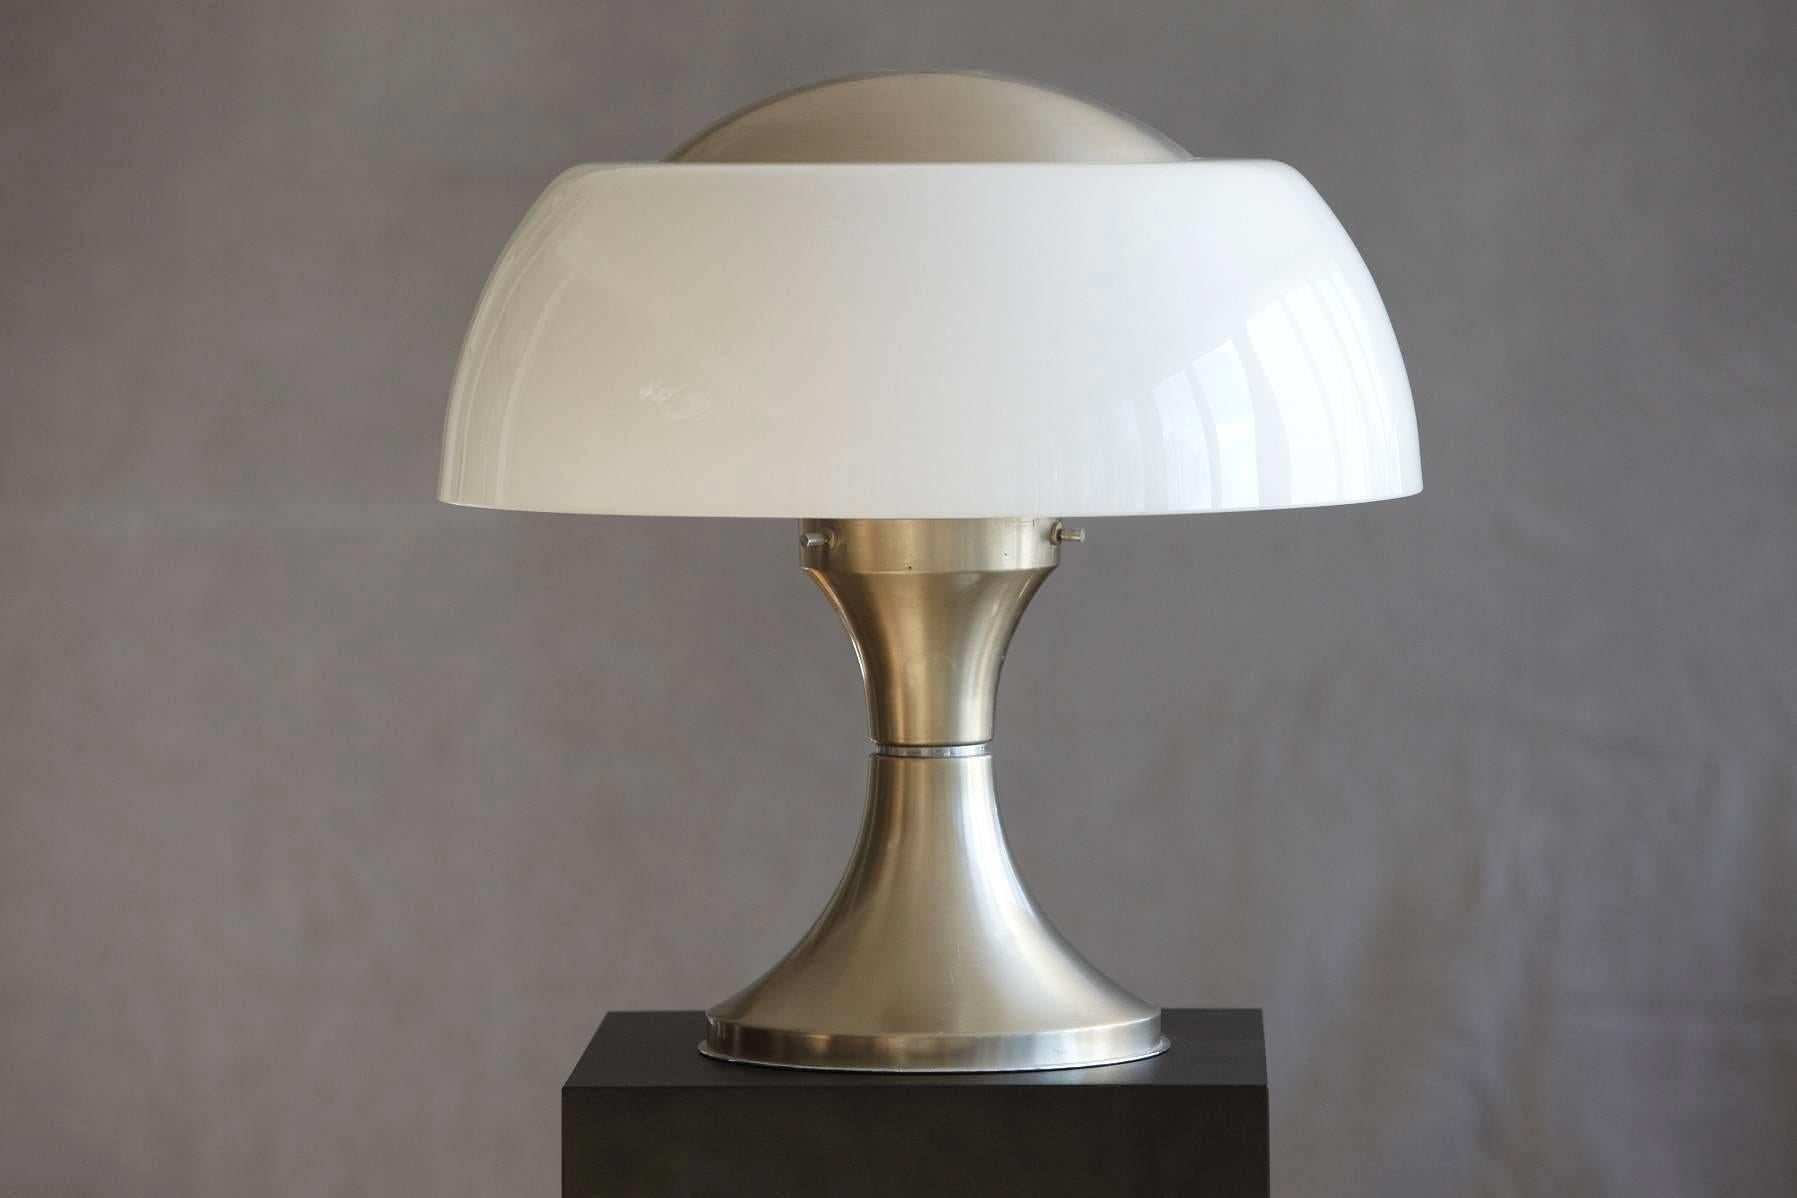 Chromed steel table lamp base with a mat finish and an internal opaline glass diffuser and a perspex lampshade, designed by Gaetano Sciolari for Ecolight formerly Valenti, 1968.
The base has a tiny dent, please refer to the photos, otherwise in very